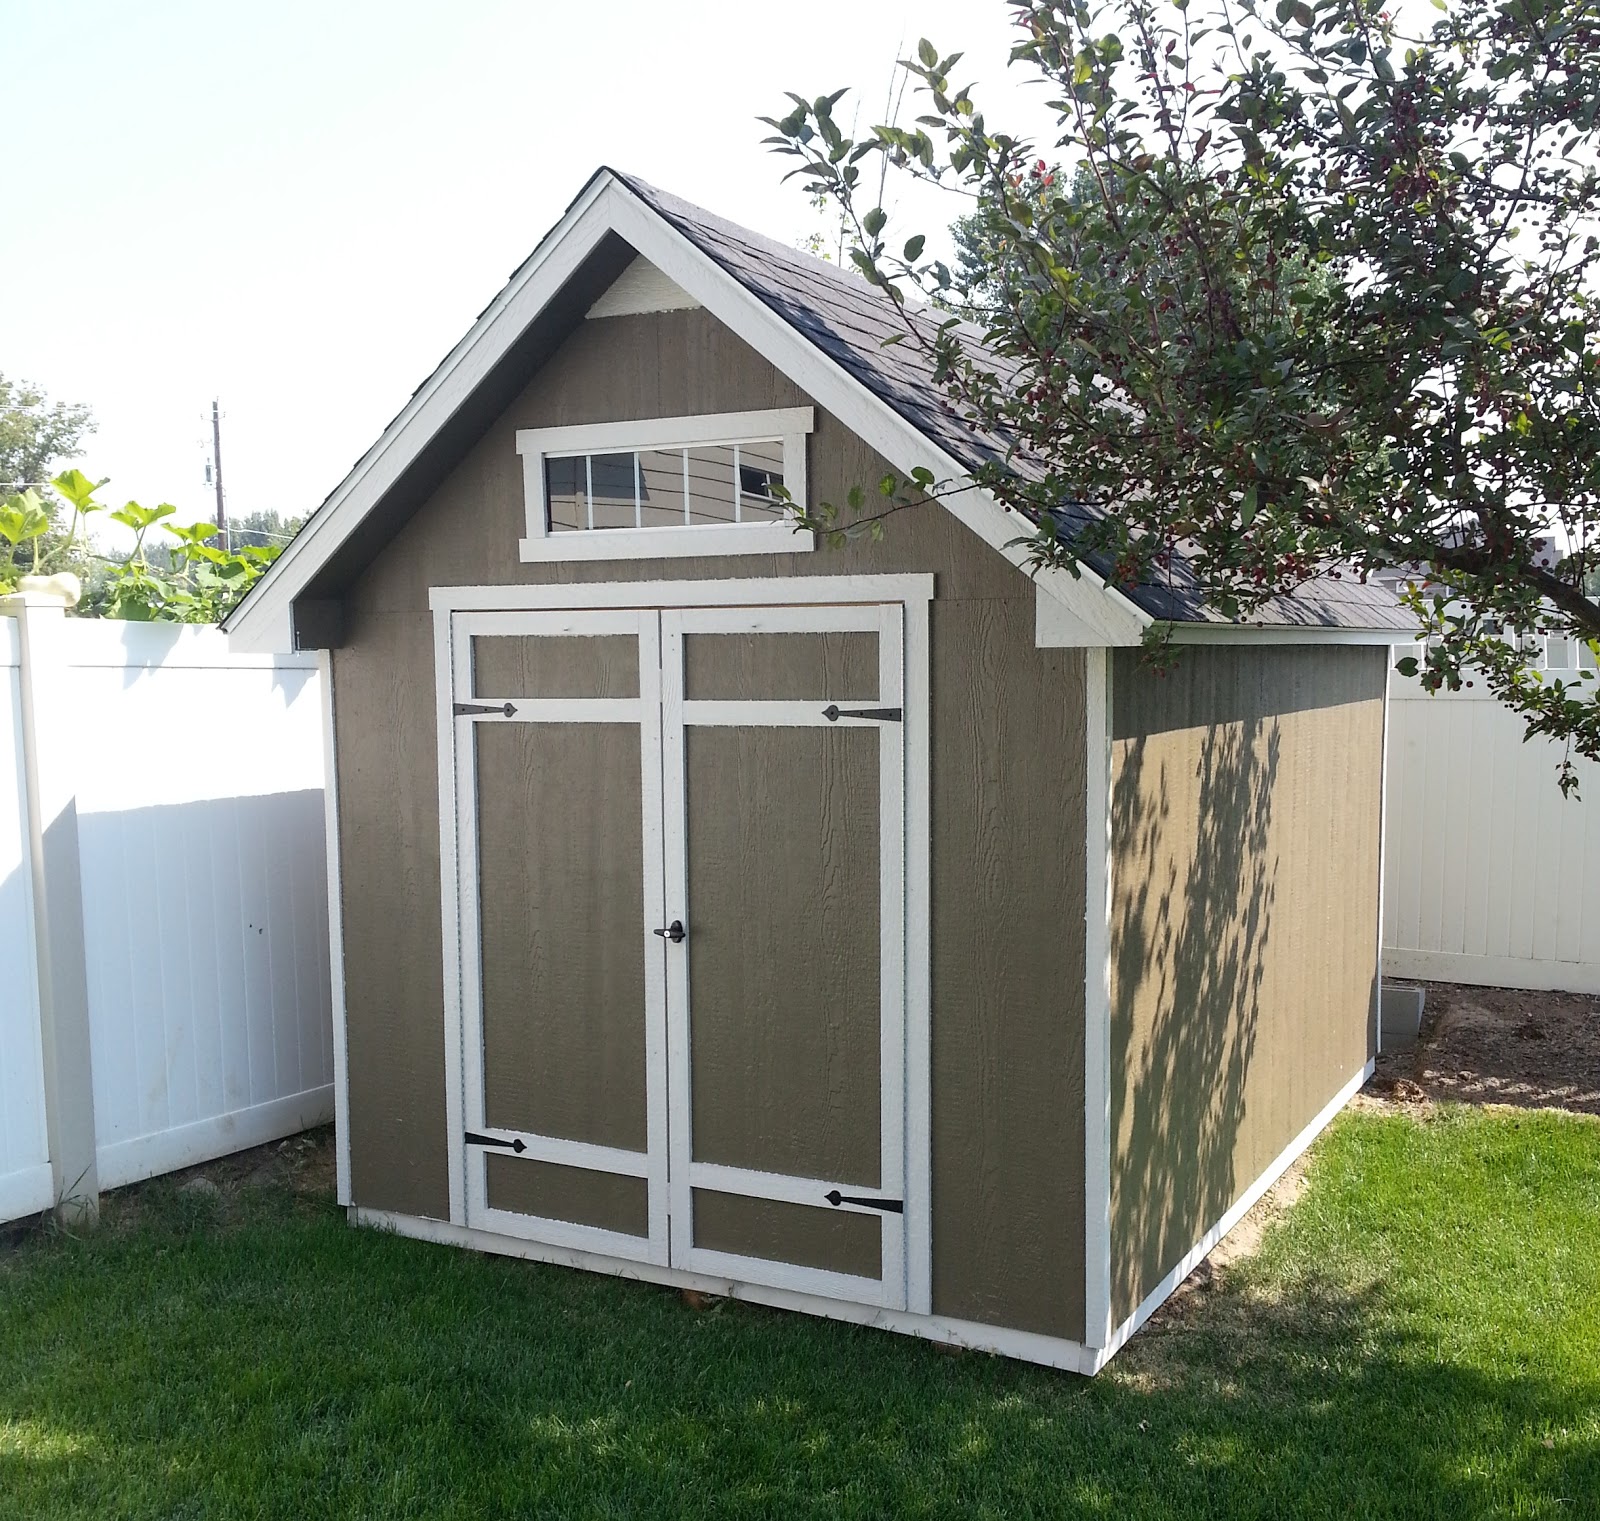 you can save up to $800 on sheds at costco right now - dwym